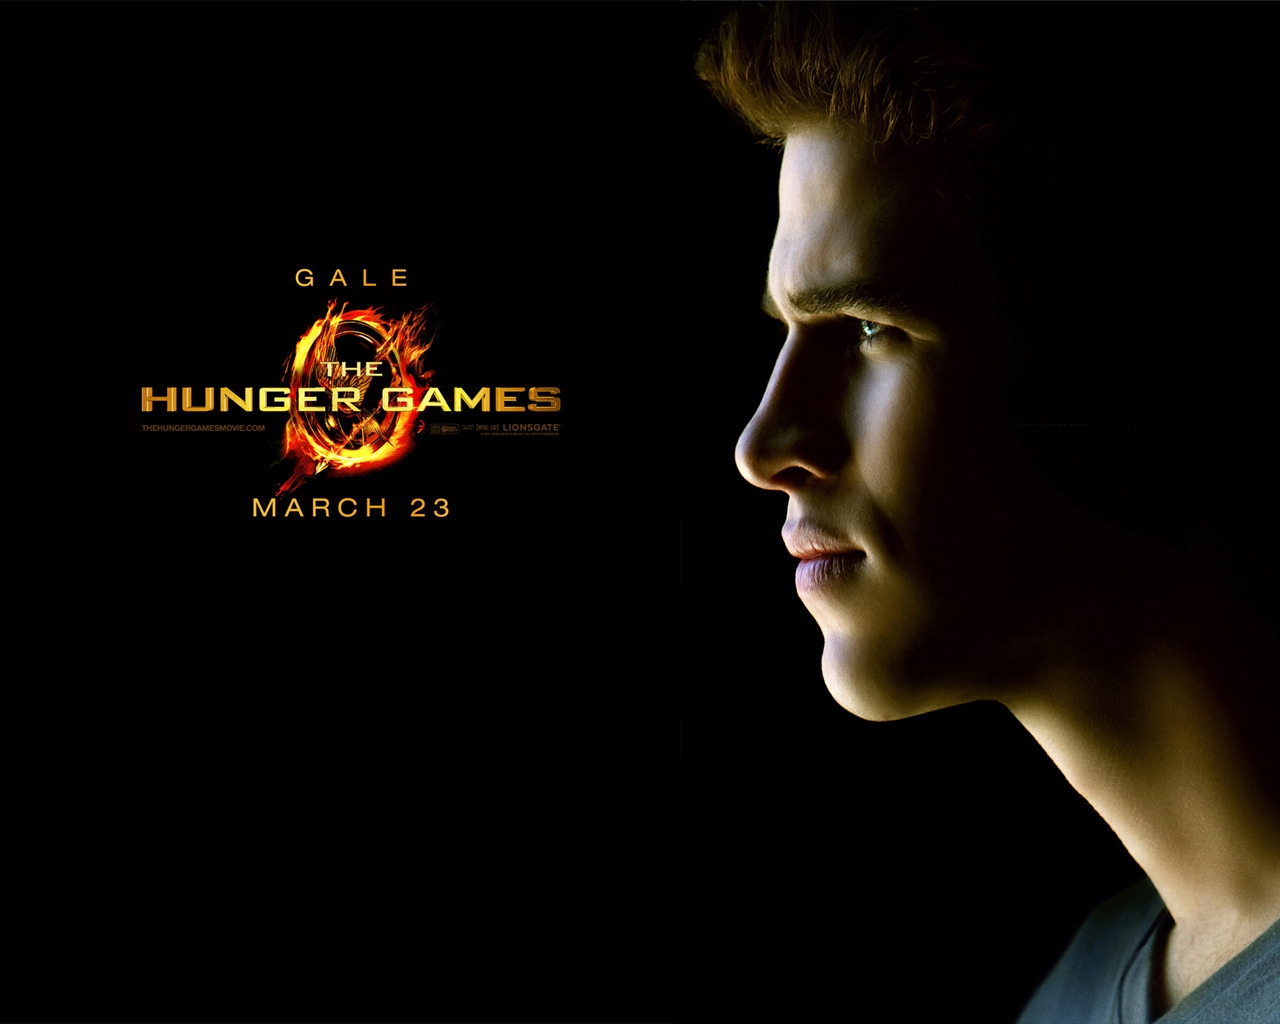 The Hunger Games Gale for 1280 x 1024 resolution